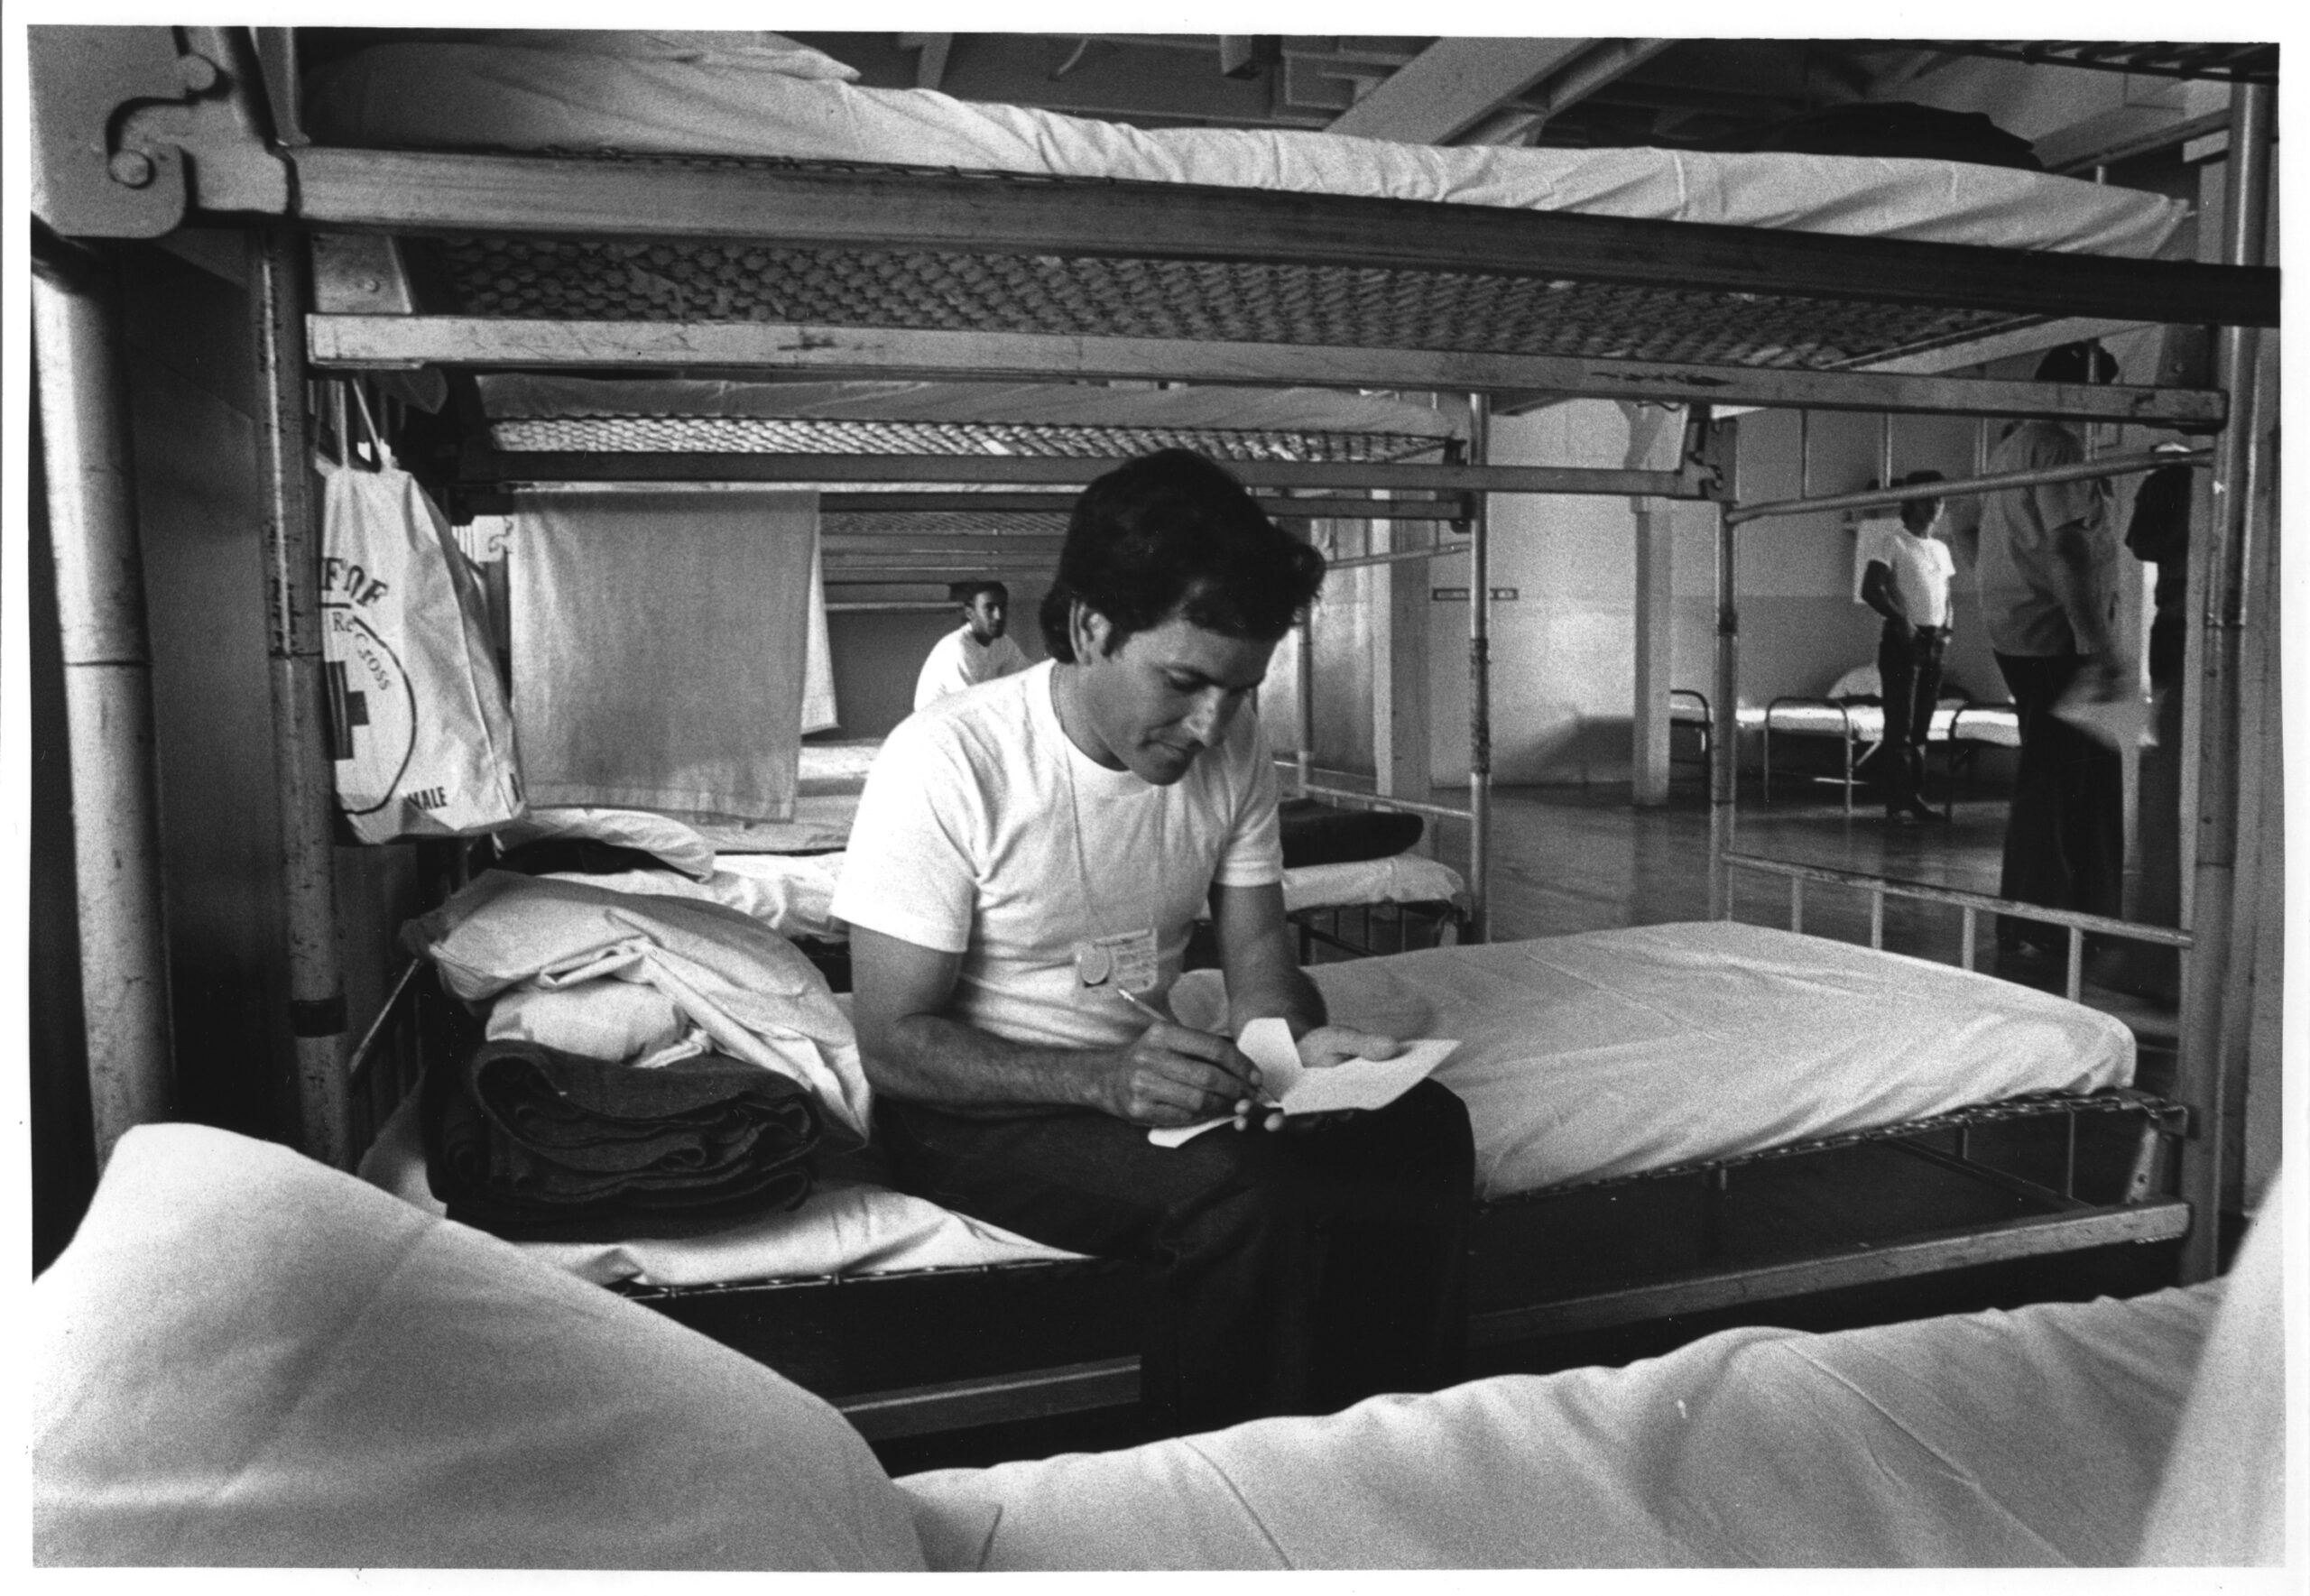 A black and white photograph of Carlos Miguel Larrosa Perez writing while sitting on a bed inside one of the barracks